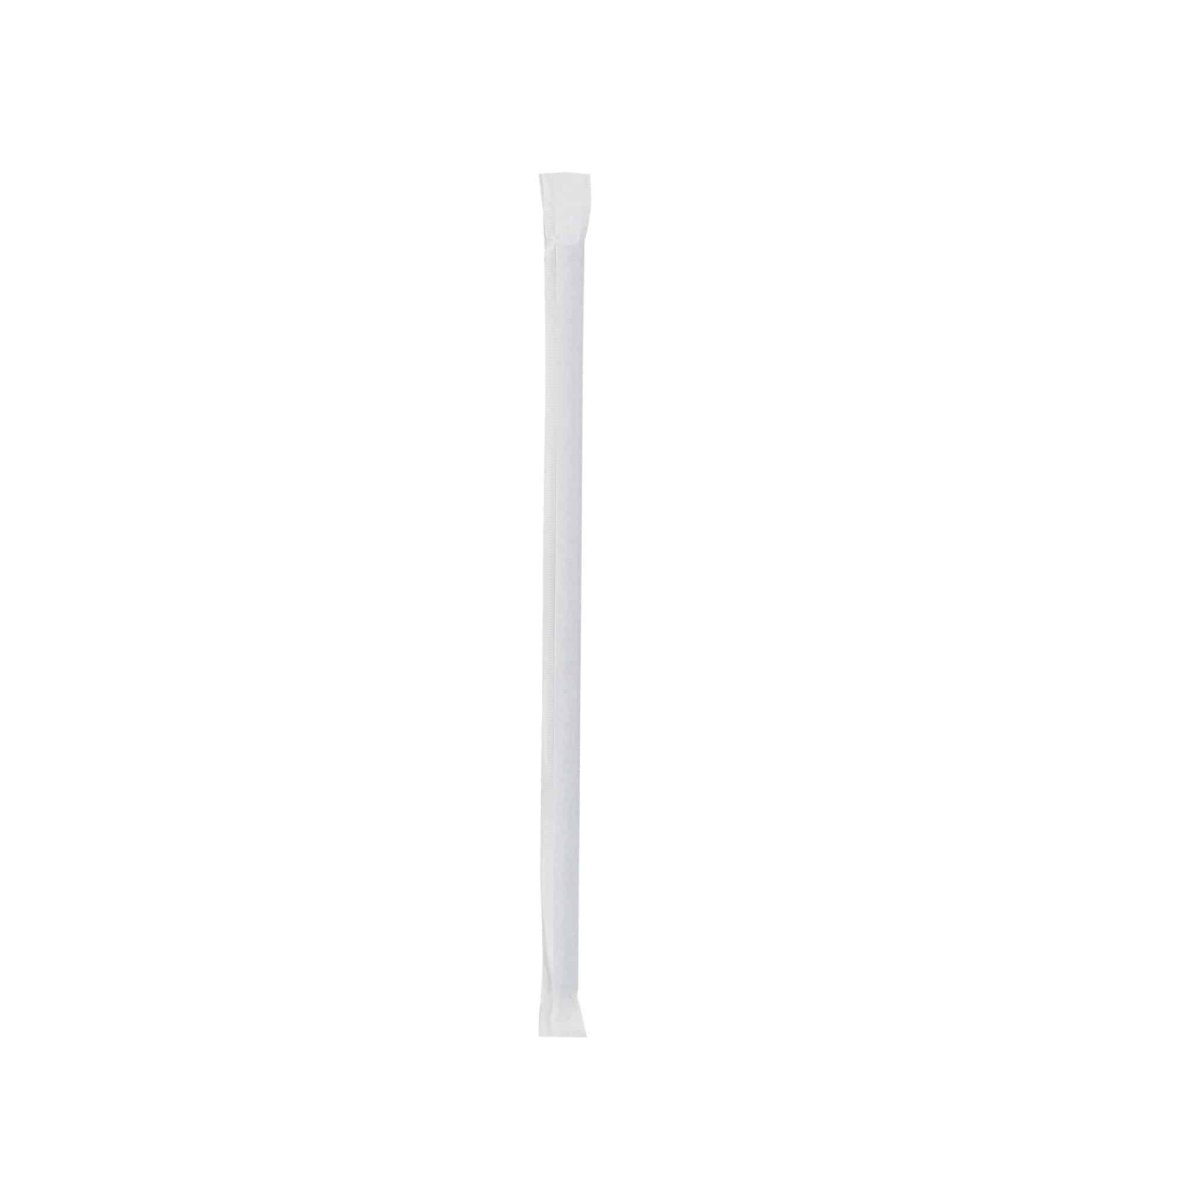 7mm Black Straight Straw Wrapped 250 Pieces x 40 Packet - hotpackwebstore.com - Plastic Straws